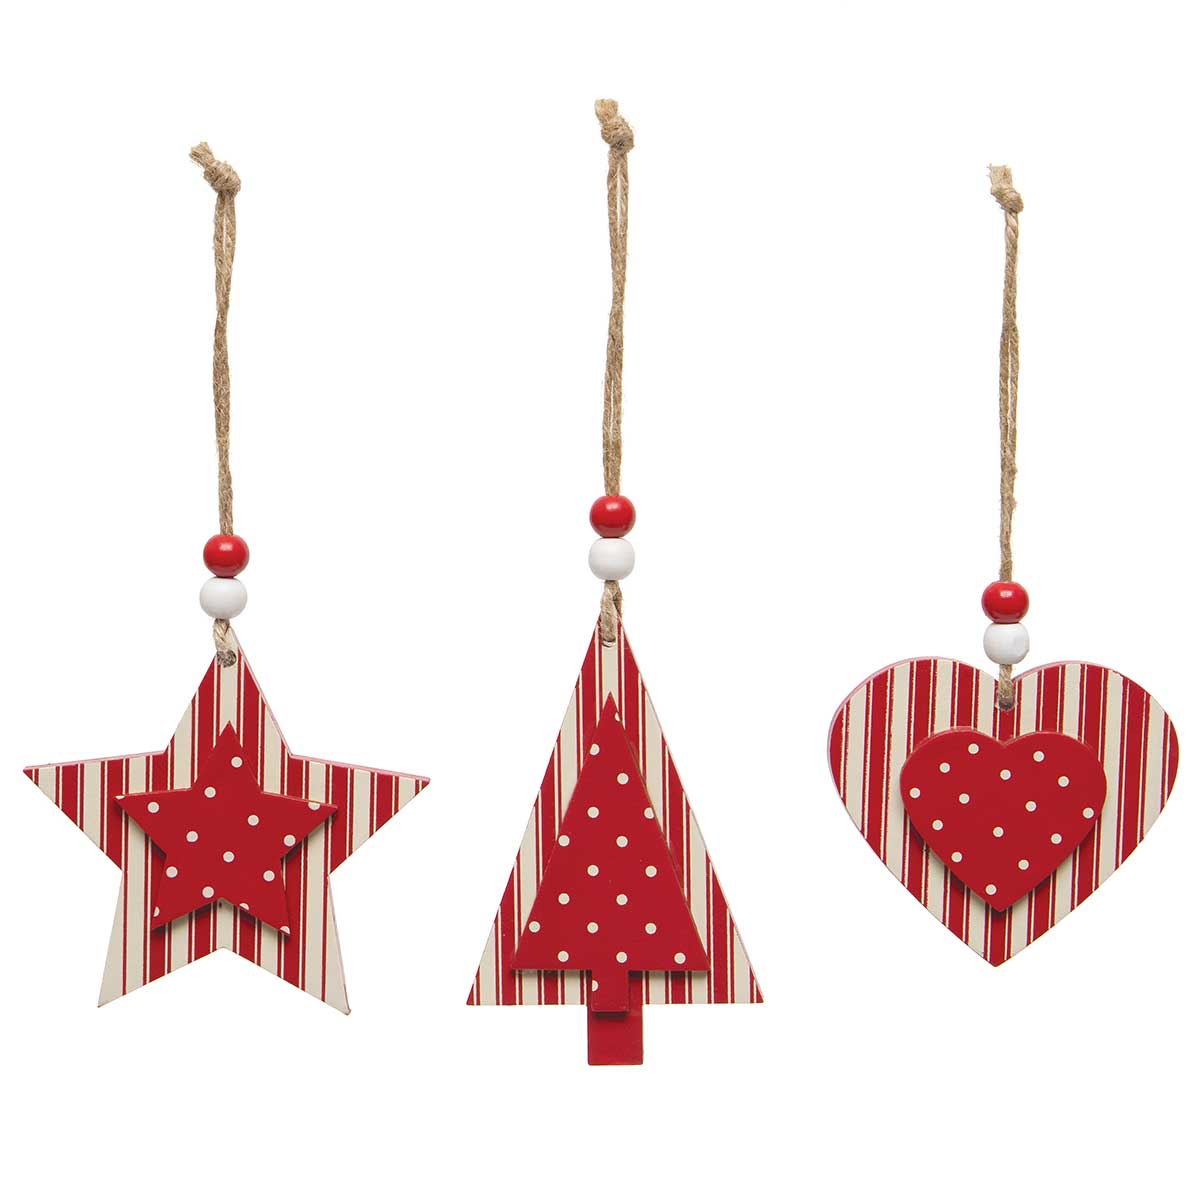 !TICKING WOOD ORNAMENT RED/CREAM WITH PINDOTS, BEADS b50